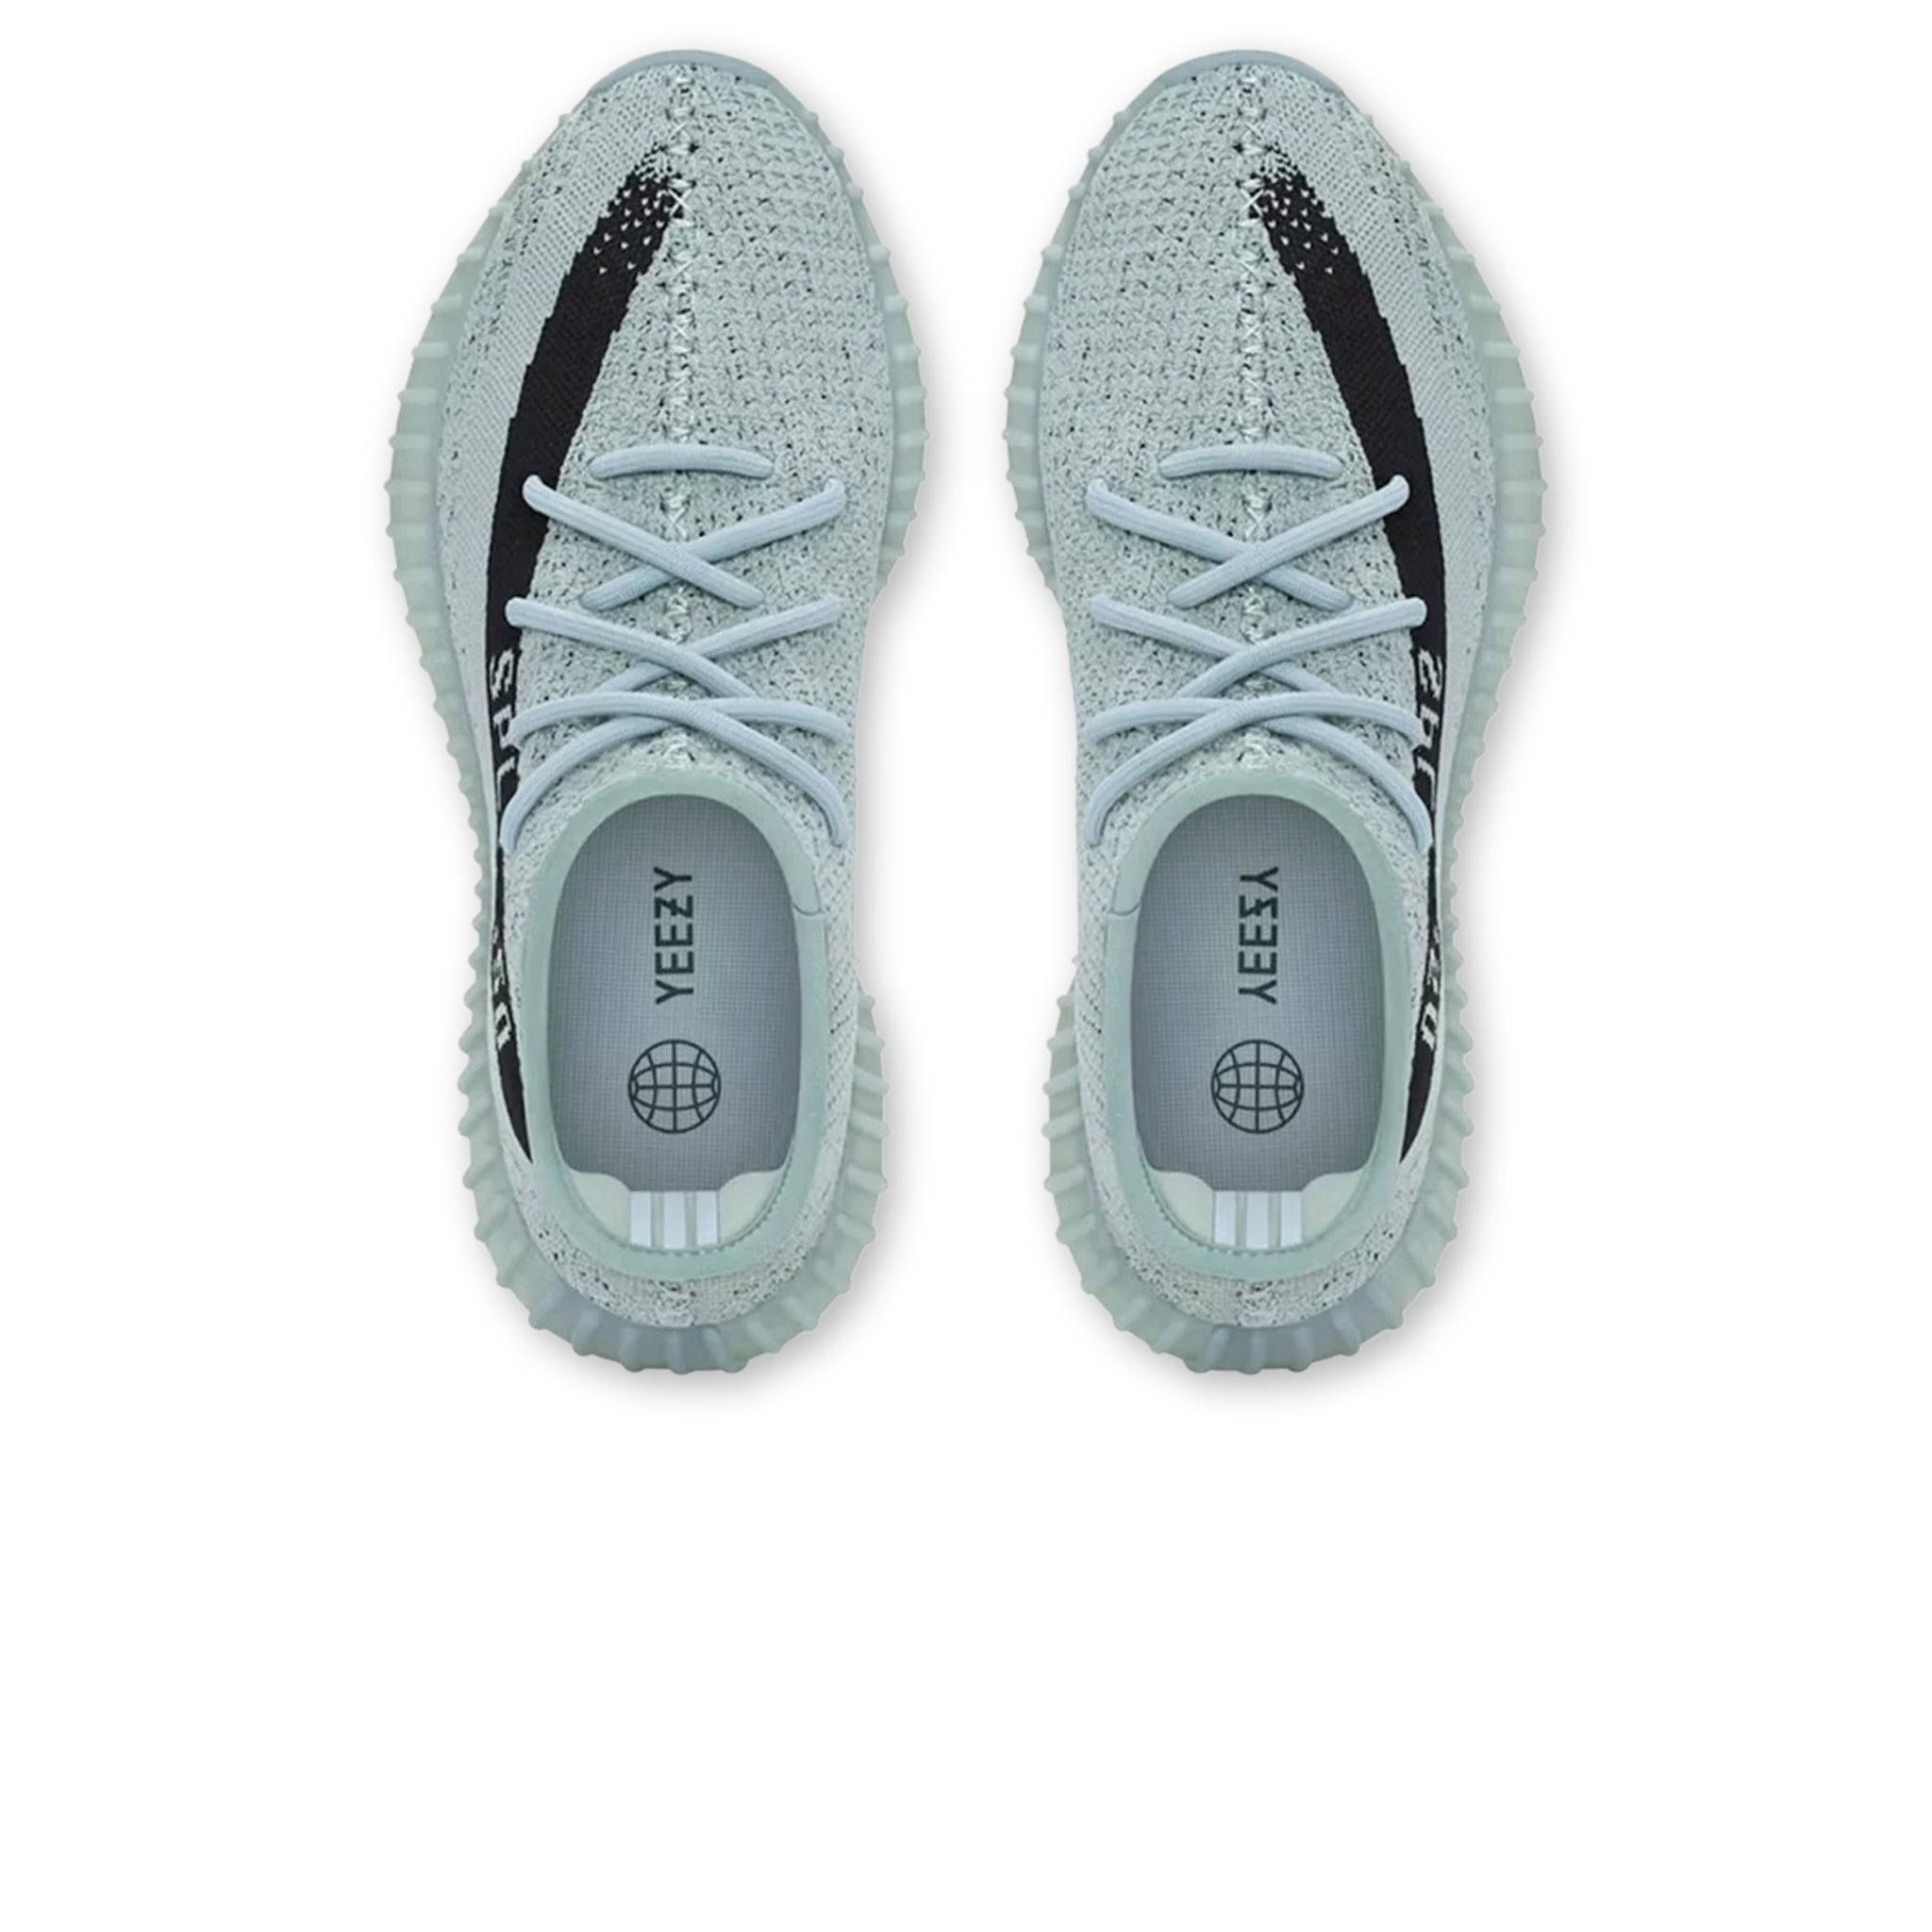 Top down view of Adidas Yeezy Boost 350 V2 Salt HQ2060